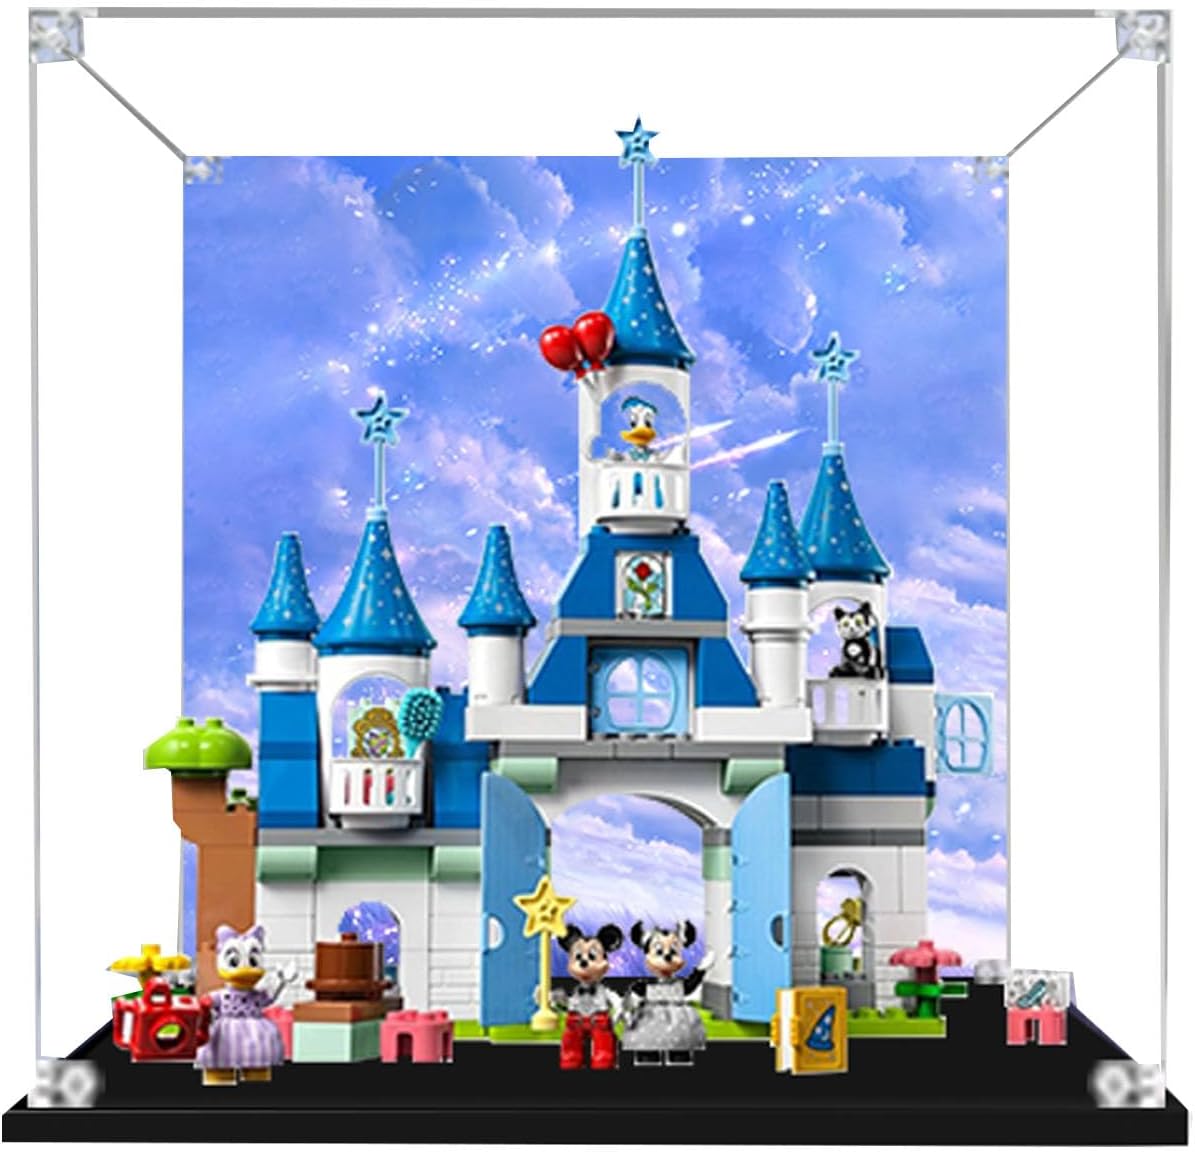 Acrylic Display Case for Lego Disney 3in1 Magic Castle 10998 Model - Dustproof Anti-UV Storage Box for Collectors (Transparent)